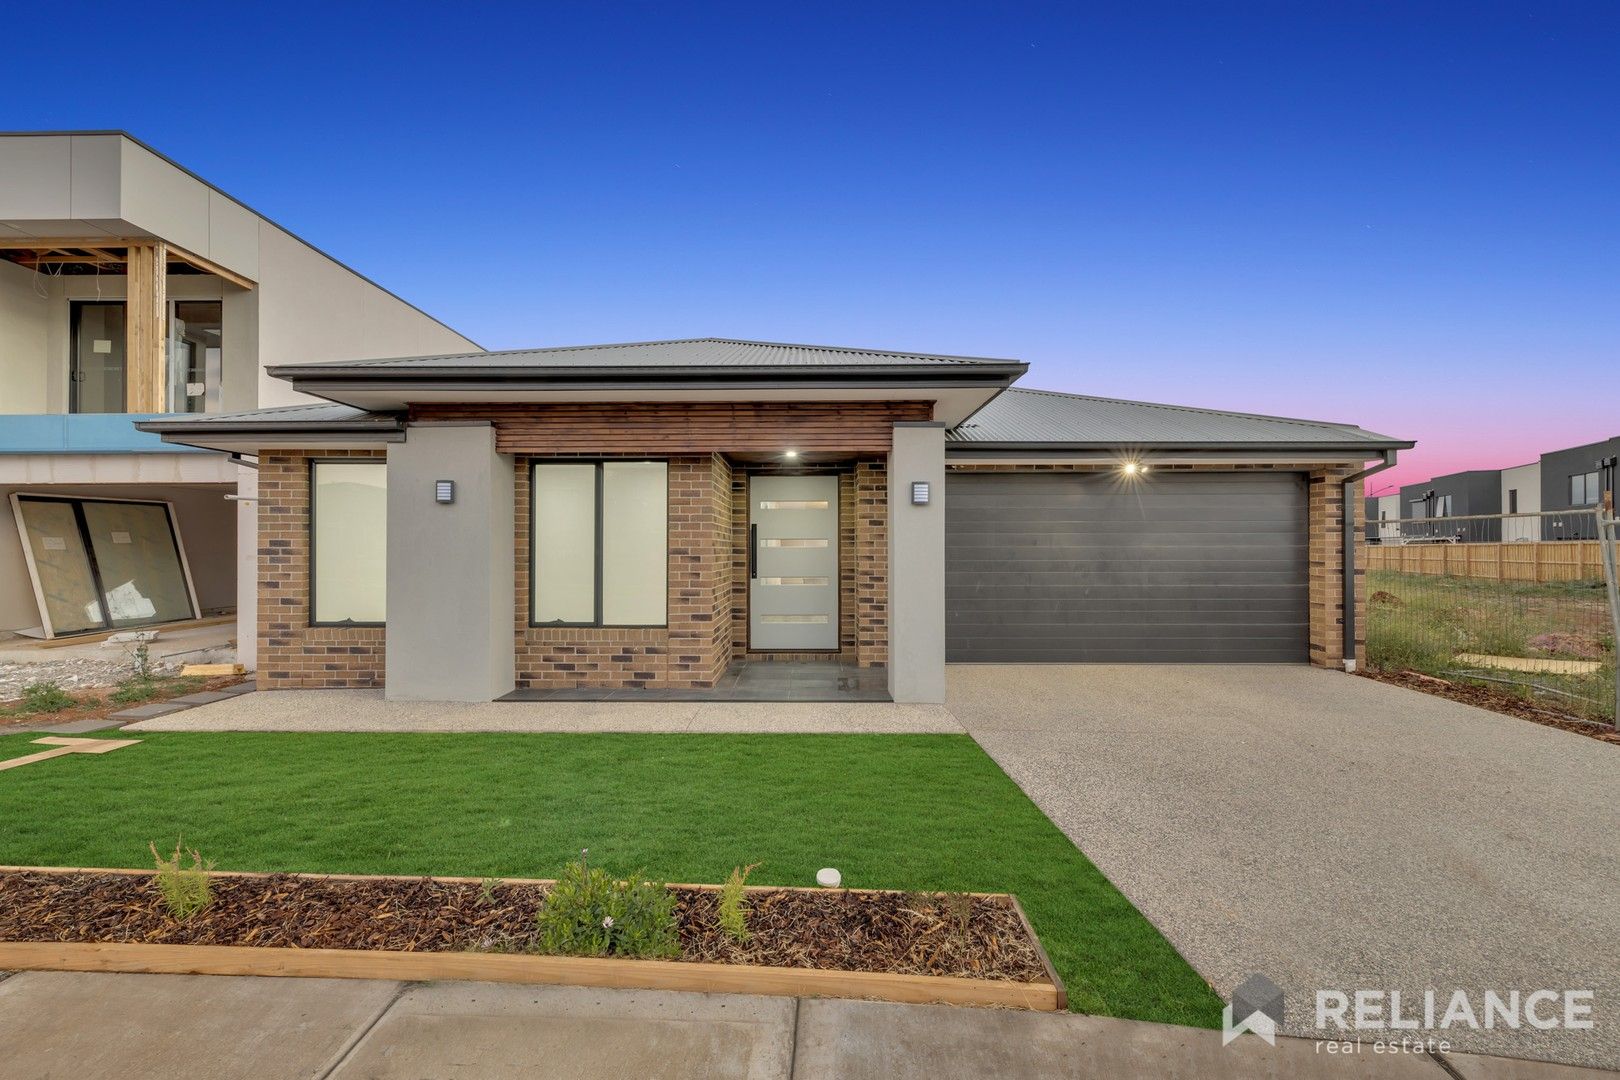 4 bedrooms House in 6 Alisma Avenue DEANSIDE VIC, 3336